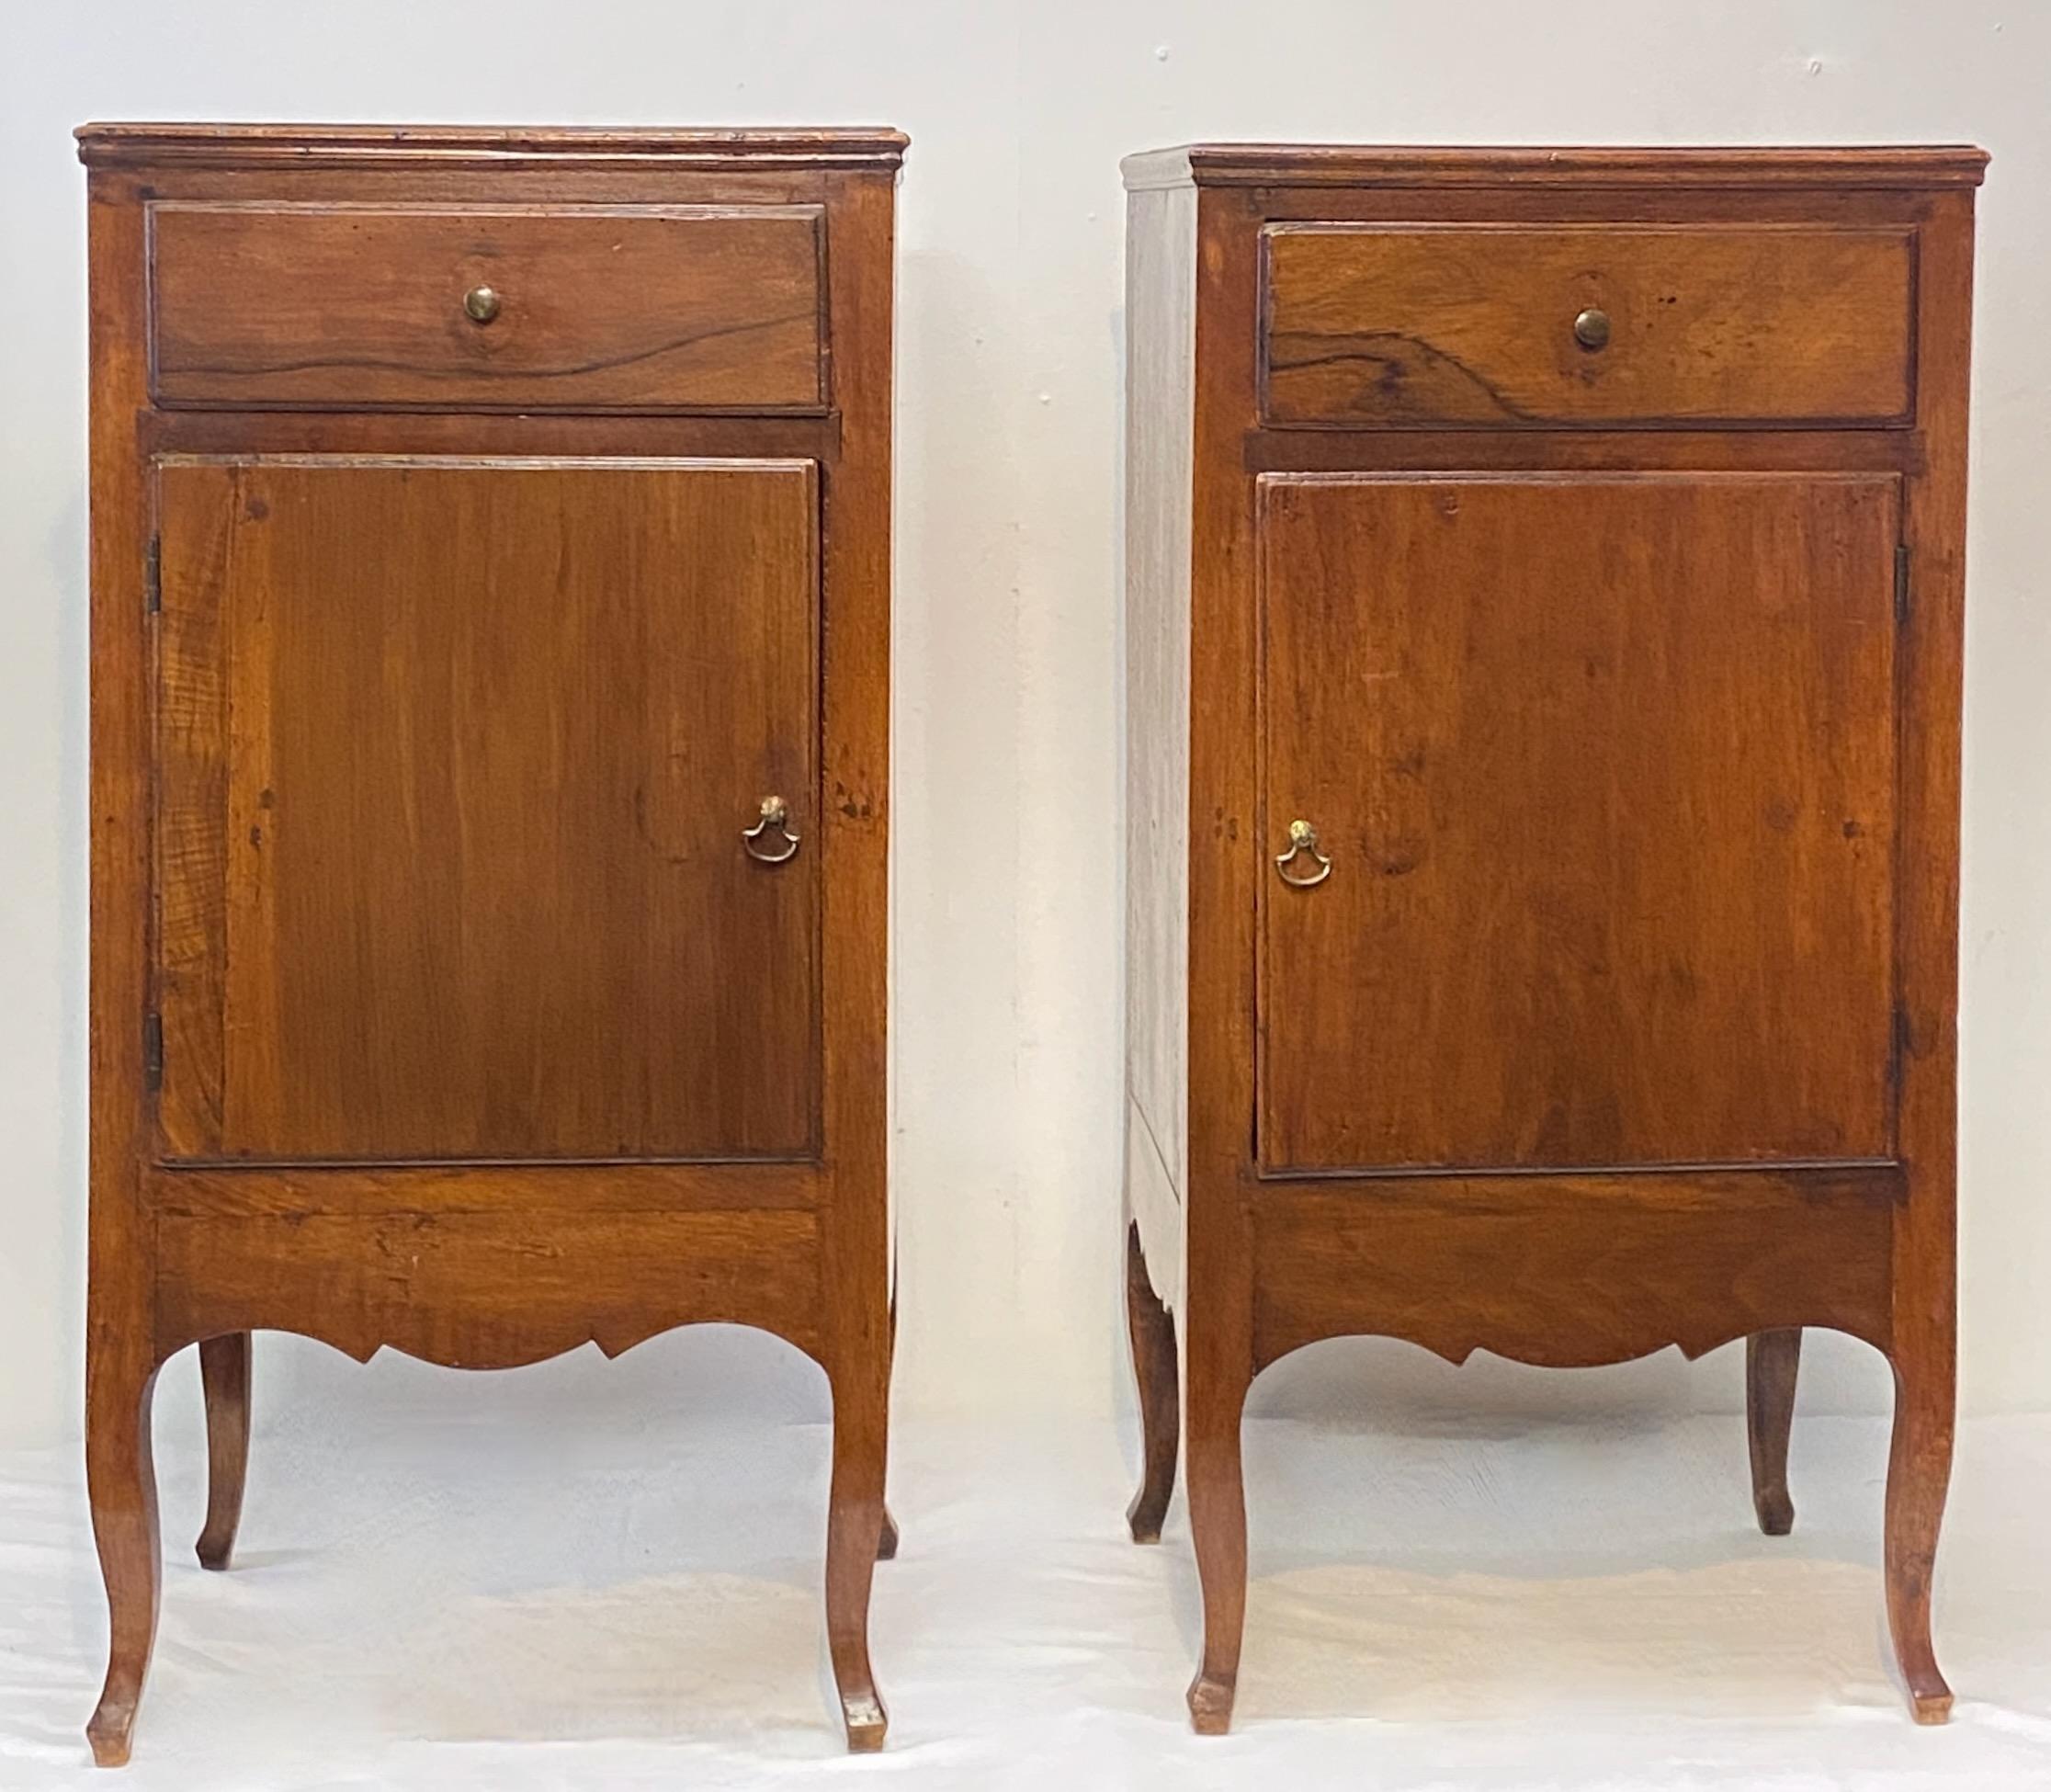 A pair of 18th century central or northern Italian walnut bedside cabinets. In remarkable antique condition, having original back boards and original hand forged rose head nails.
Beautiful very old finish possibly original.